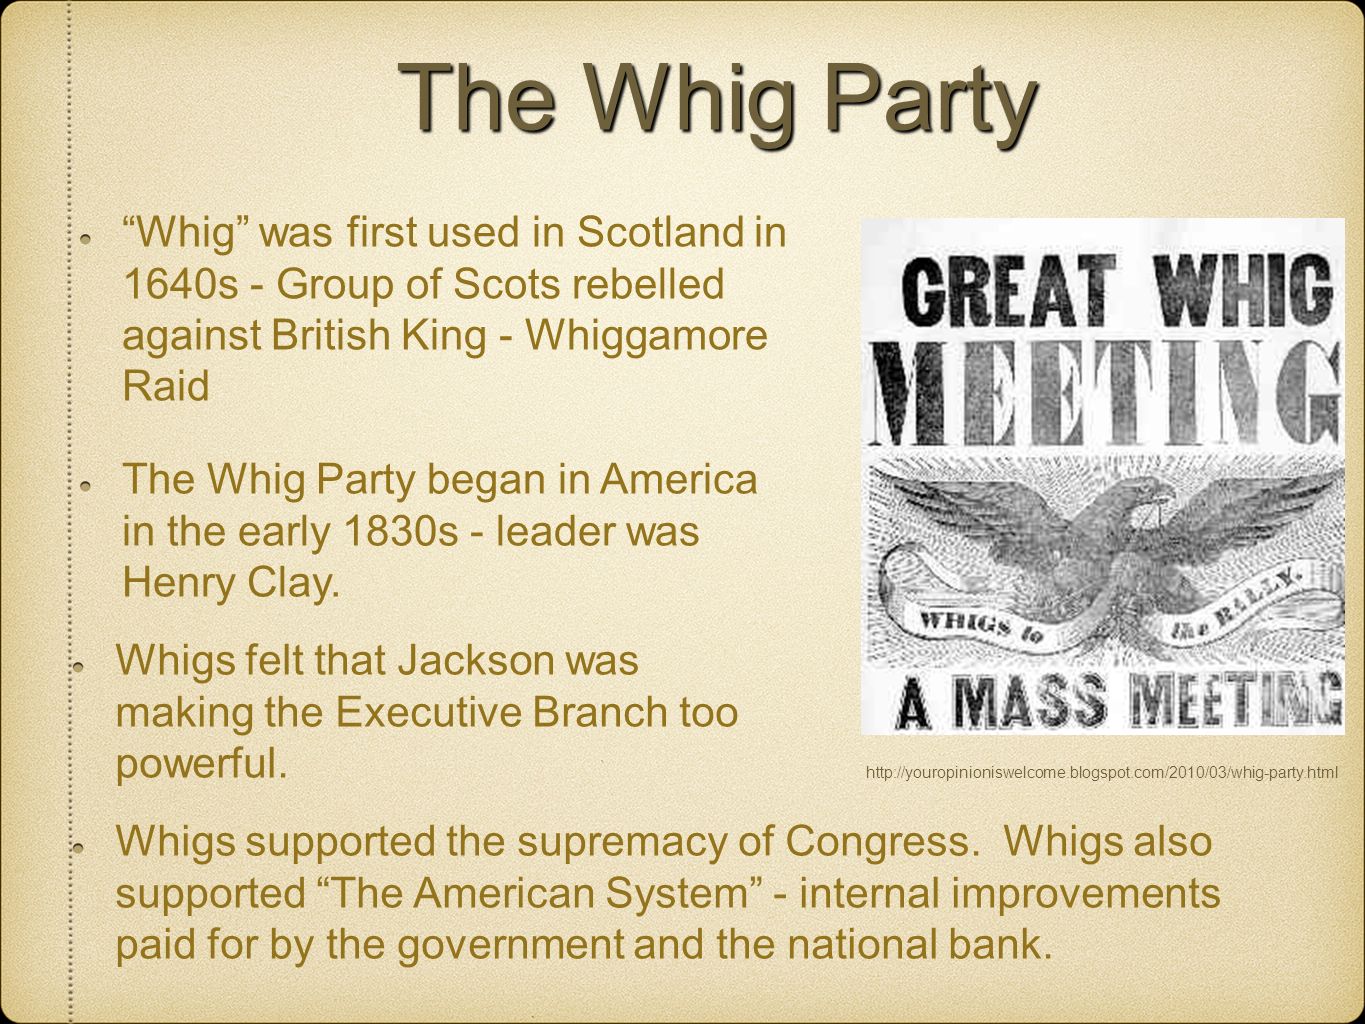 The Whig Party Whig was first used in Scotland in 1640s - Group of Scots rebelled against British King - Whiggamore Raid.